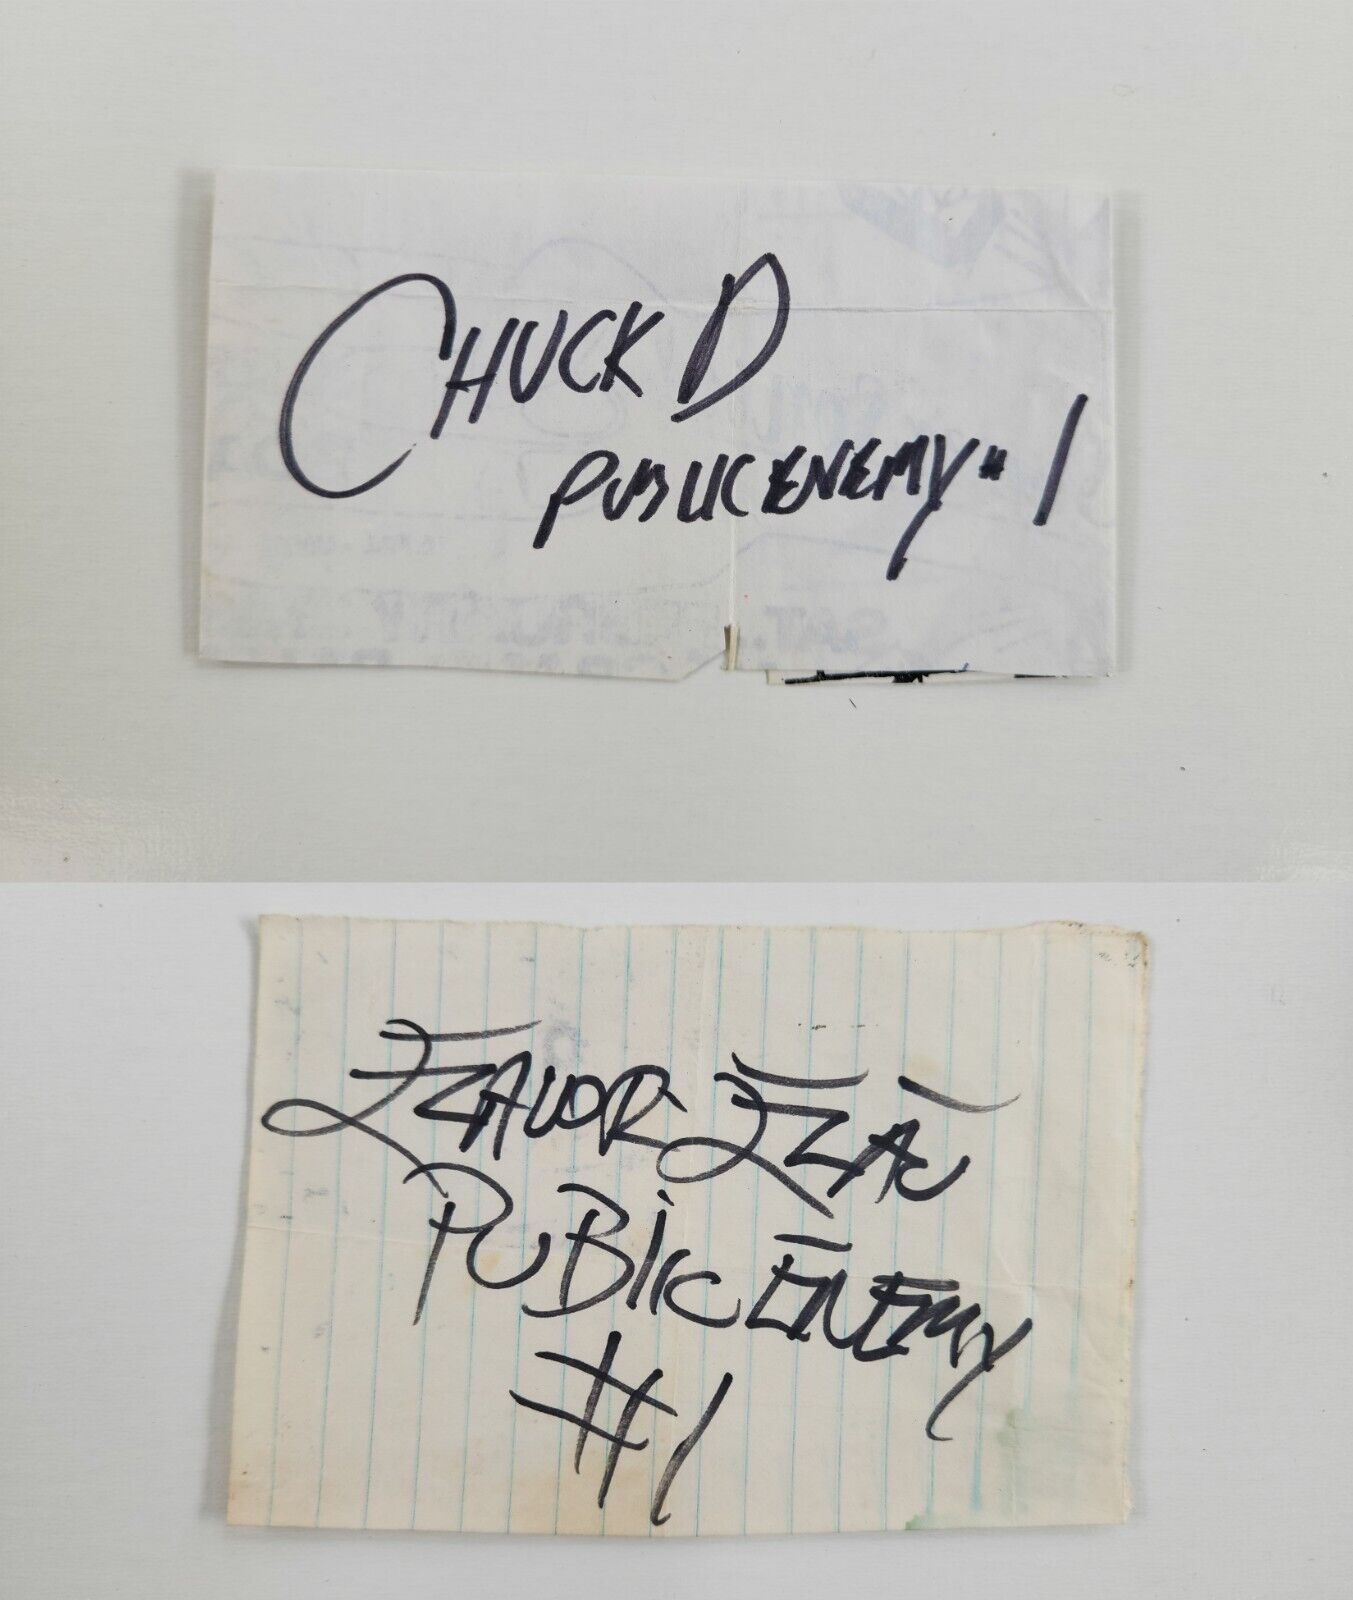 Public Enemy (Chuck D & Flavor Flav) signed 1988 UCLA Concert Flyer and Notebook